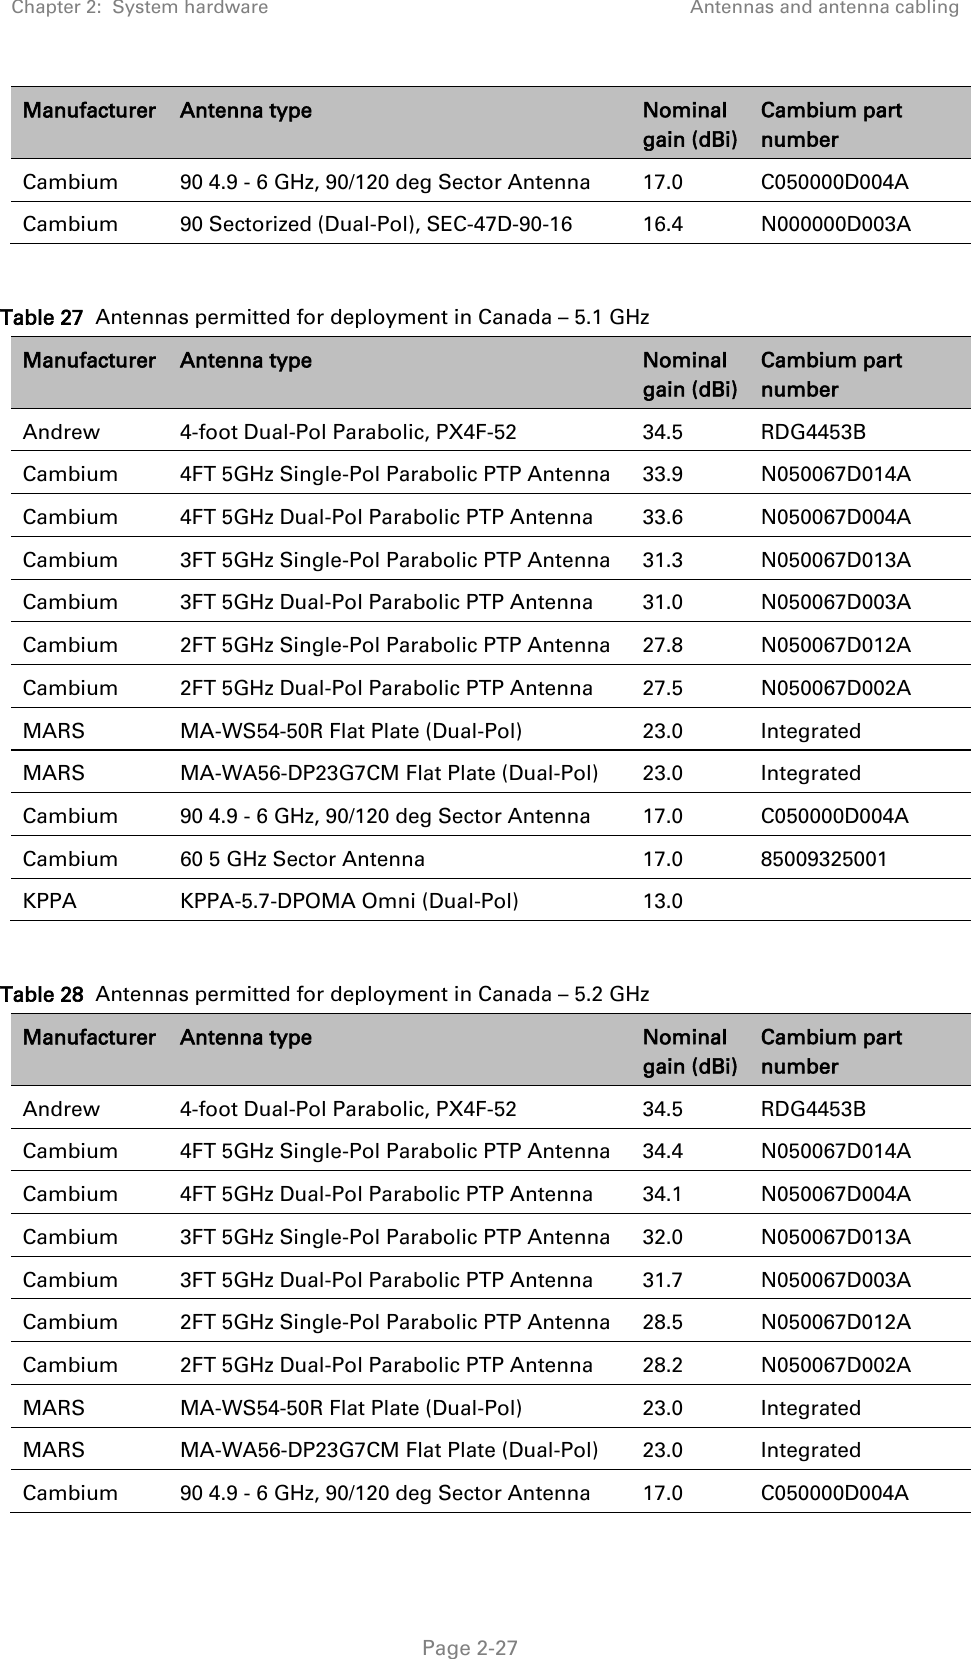 Chapter 2:  System hardware Antennas and antenna cabling   Page 2-27 Manufacturer Antenna type Nominal gain (dBi) Cambium part number Cambium 90 4.9 - 6 GHz, 90/120 deg Sector Antenna 17.0 C050000D004A Cambium 90 Sectorized (Dual-Pol), SEC-47D-90-16 16.4 N000000D003A  Table 27  Antennas permitted for deployment in Canada – 5.1 GHz Manufacturer Antenna type Nominal gain (dBi) Cambium part number Andrew  4-foot Dual-Pol Parabolic, PX4F-52   34.5 RDG4453B Cambium 4FT 5GHz Single-Pol Parabolic PTP Antenna 33.9 N050067D014A Cambium 4FT 5GHz Dual-Pol Parabolic PTP Antenna 33.6 N050067D004A Cambium 3FT 5GHz Single-Pol Parabolic PTP Antenna 31.3 N050067D013A Cambium 3FT 5GHz Dual-Pol Parabolic PTP Antenna 31.0 N050067D003A Cambium 2FT 5GHz Single-Pol Parabolic PTP Antenna 27.8 N050067D012A Cambium 2FT 5GHz Dual-Pol Parabolic PTP Antenna 27.5 N050067D002A MARS MA-WS54-50R Flat Plate (Dual-Pol)  23.0  Integrated MARS MA-WA56-DP23G7CM Flat Plate (Dual-Pol)  23.0  Integrated Cambium 90 4.9 - 6 GHz, 90/120 deg Sector Antenna 17.0 C050000D004A Cambium 60 5 GHz Sector Antenna 17.0 85009325001 KPPA  KPPA-5.7-DPOMA Omni (Dual-Pol)  13.0     Table 28  Antennas permitted for deployment in Canada – 5.2 GHz Manufacturer Antenna type Nominal gain (dBi) Cambium part number Andrew  4-foot Dual-Pol Parabolic, PX4F-52   34.5 RDG4453B Cambium 4FT 5GHz Single-Pol Parabolic PTP Antenna 34.4 N050067D014A Cambium 4FT 5GHz Dual-Pol Parabolic PTP Antenna 34.1 N050067D004A Cambium 3FT 5GHz Single-Pol Parabolic PTP Antenna 32.0 N050067D013A Cambium 3FT 5GHz Dual-Pol Parabolic PTP Antenna 31.7 N050067D003A Cambium 2FT 5GHz Single-Pol Parabolic PTP Antenna 28.5 N050067D012A Cambium 2FT 5GHz Dual-Pol Parabolic PTP Antenna 28.2 N050067D002A MARS MA-WS54-50R Flat Plate (Dual-Pol)  23.0  Integrated MARS MA-WA56-DP23G7CM Flat Plate (Dual-Pol)  23.0  Integrated Cambium 90 4.9 - 6 GHz, 90/120 deg Sector Antenna 17.0 C050000D004A 